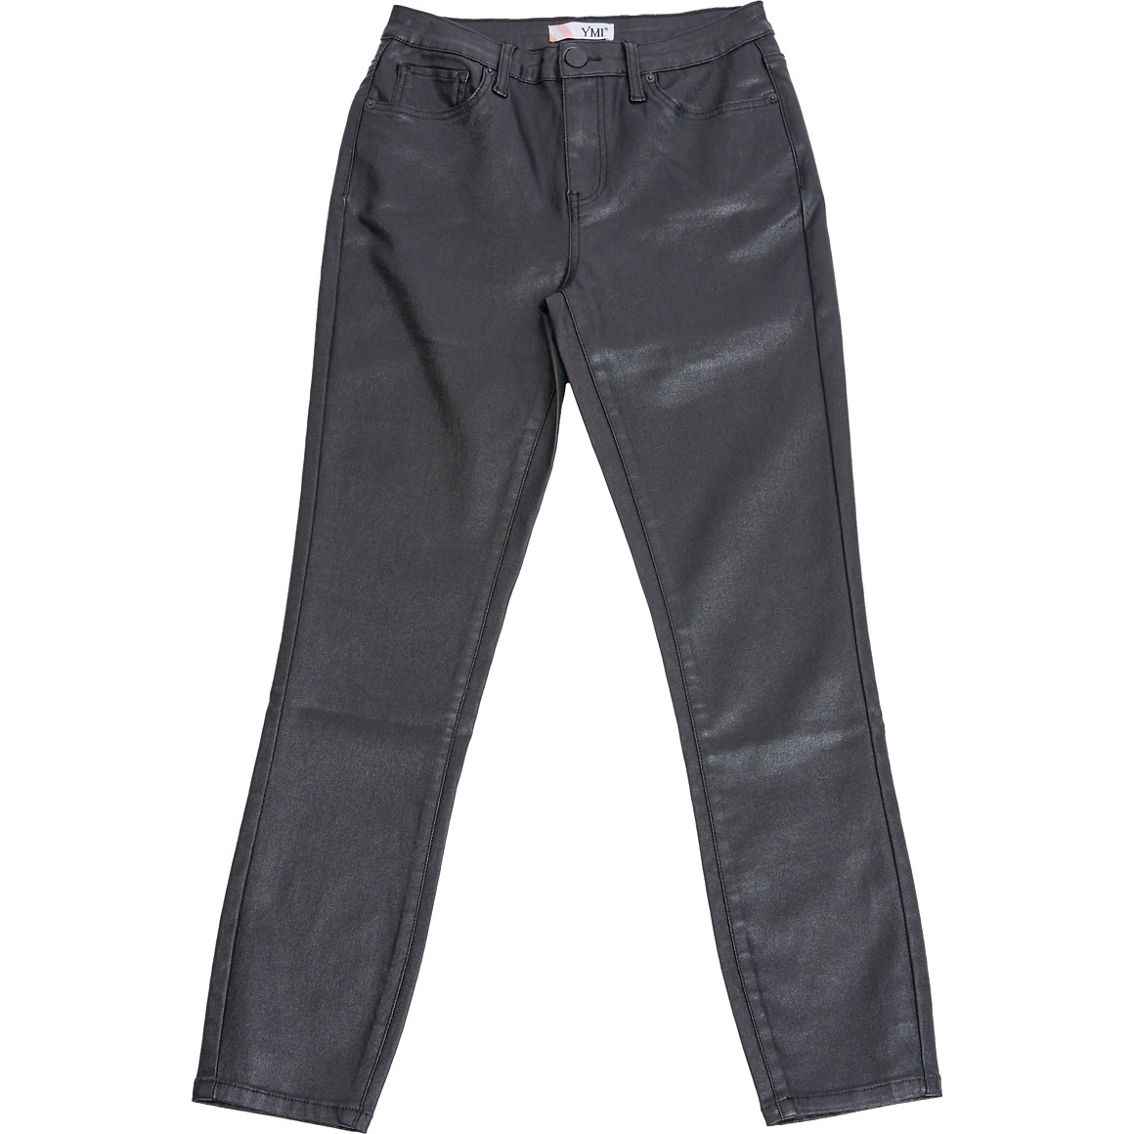 Ymi Jeans Juniors Skinny Metallic Jeans, Jeans, Clothing & Accessories